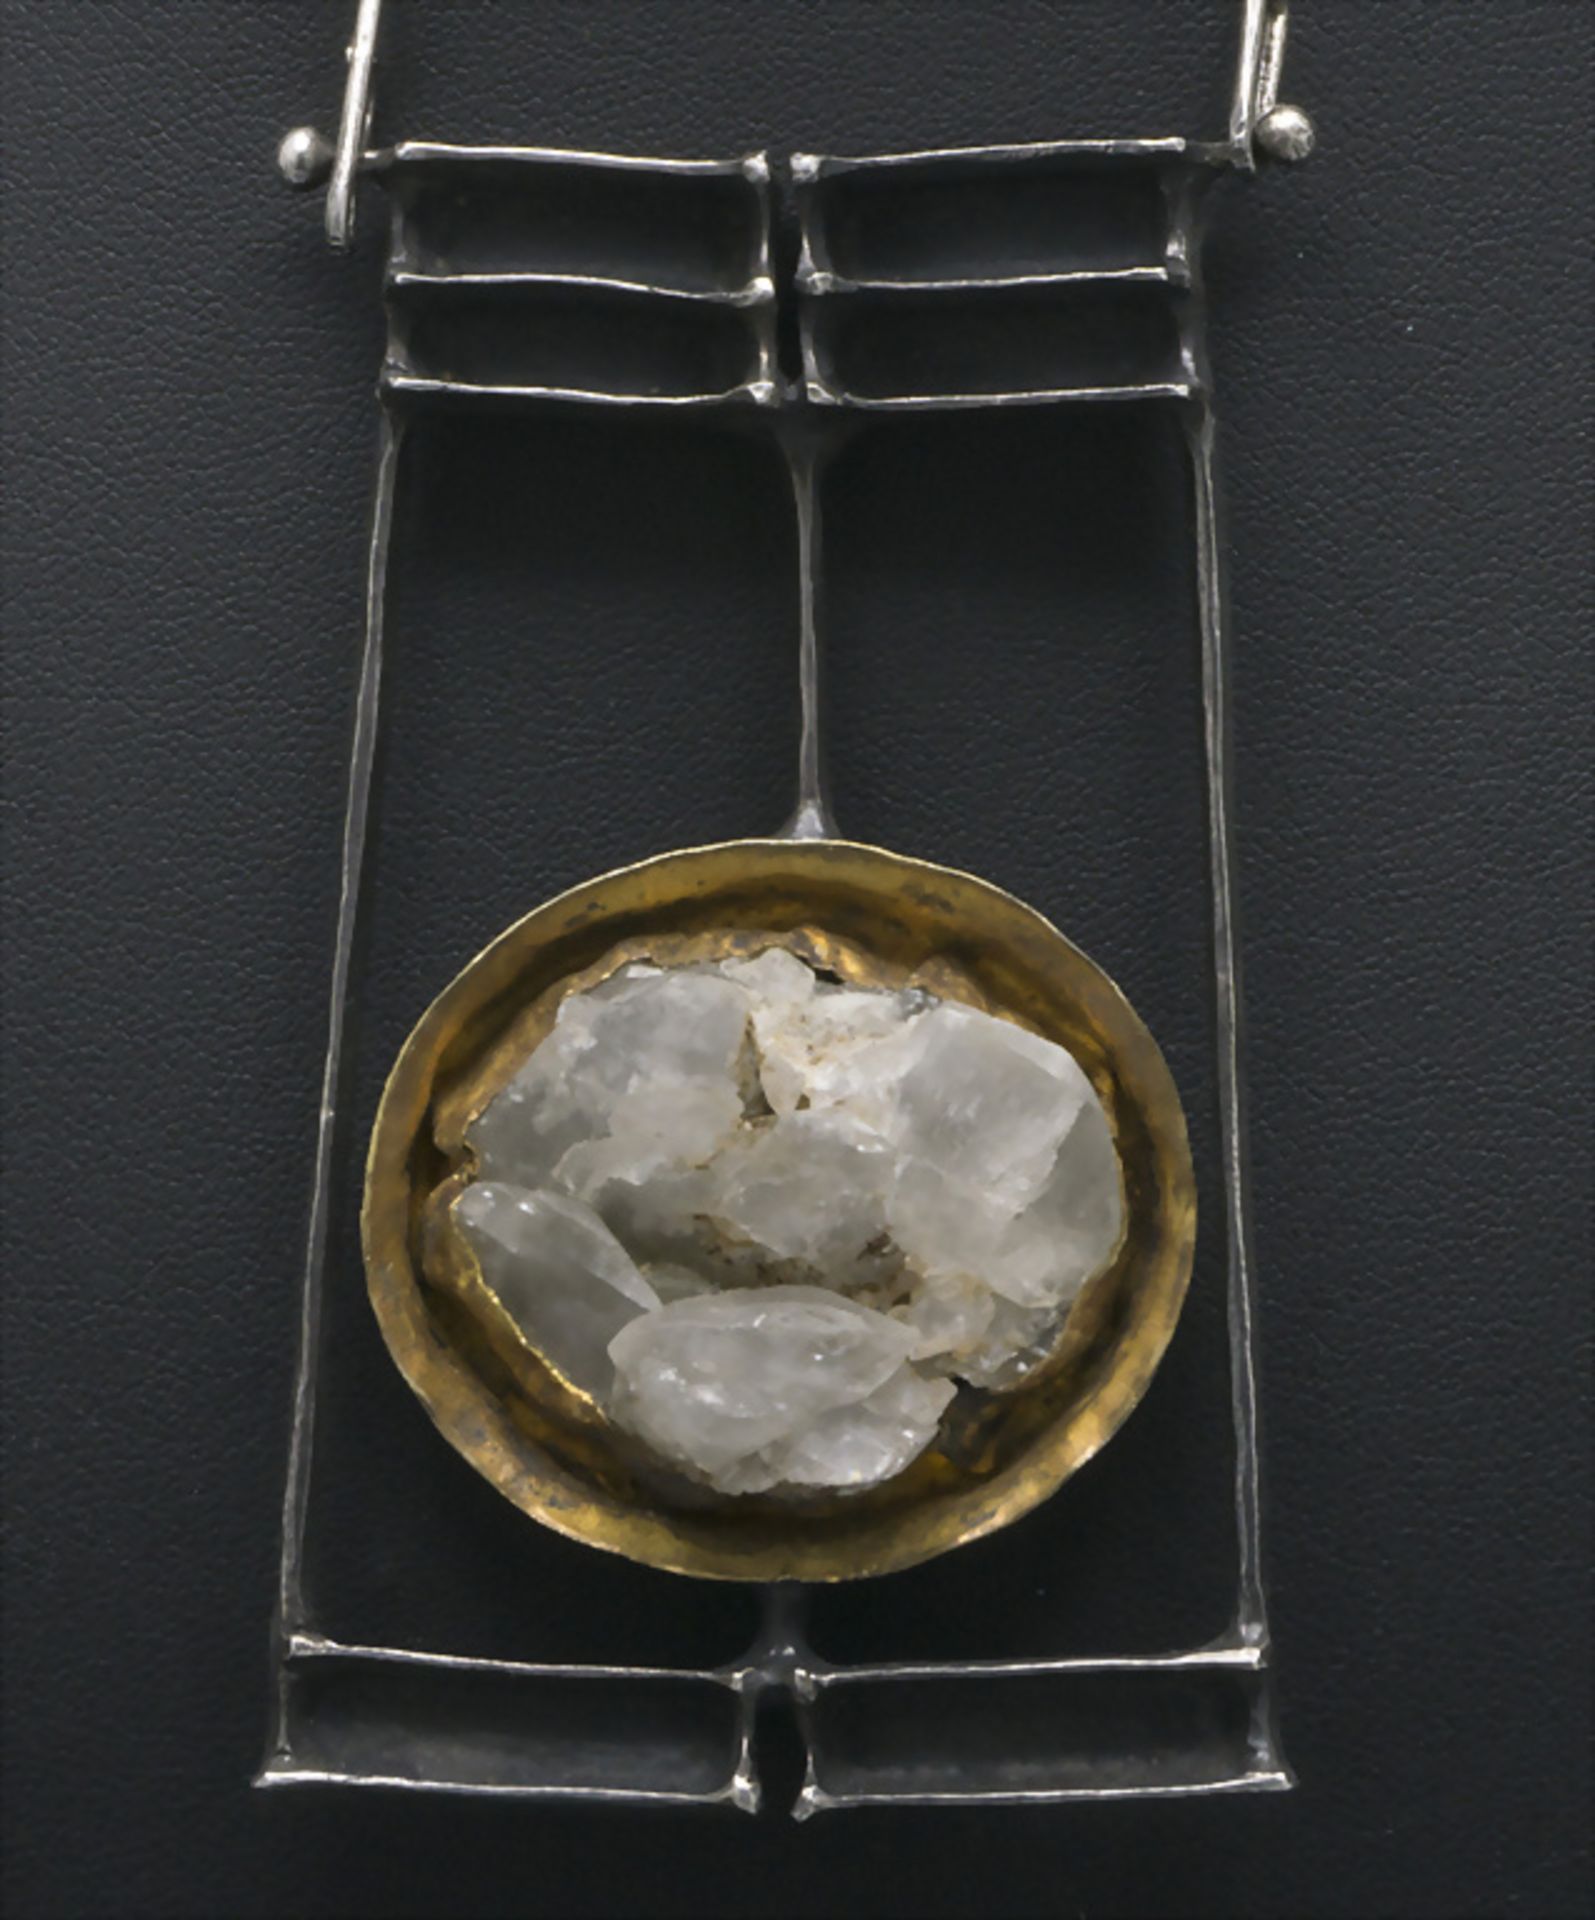 Silber Collier / A silver necklace, 20. Jh. - Image 2 of 2